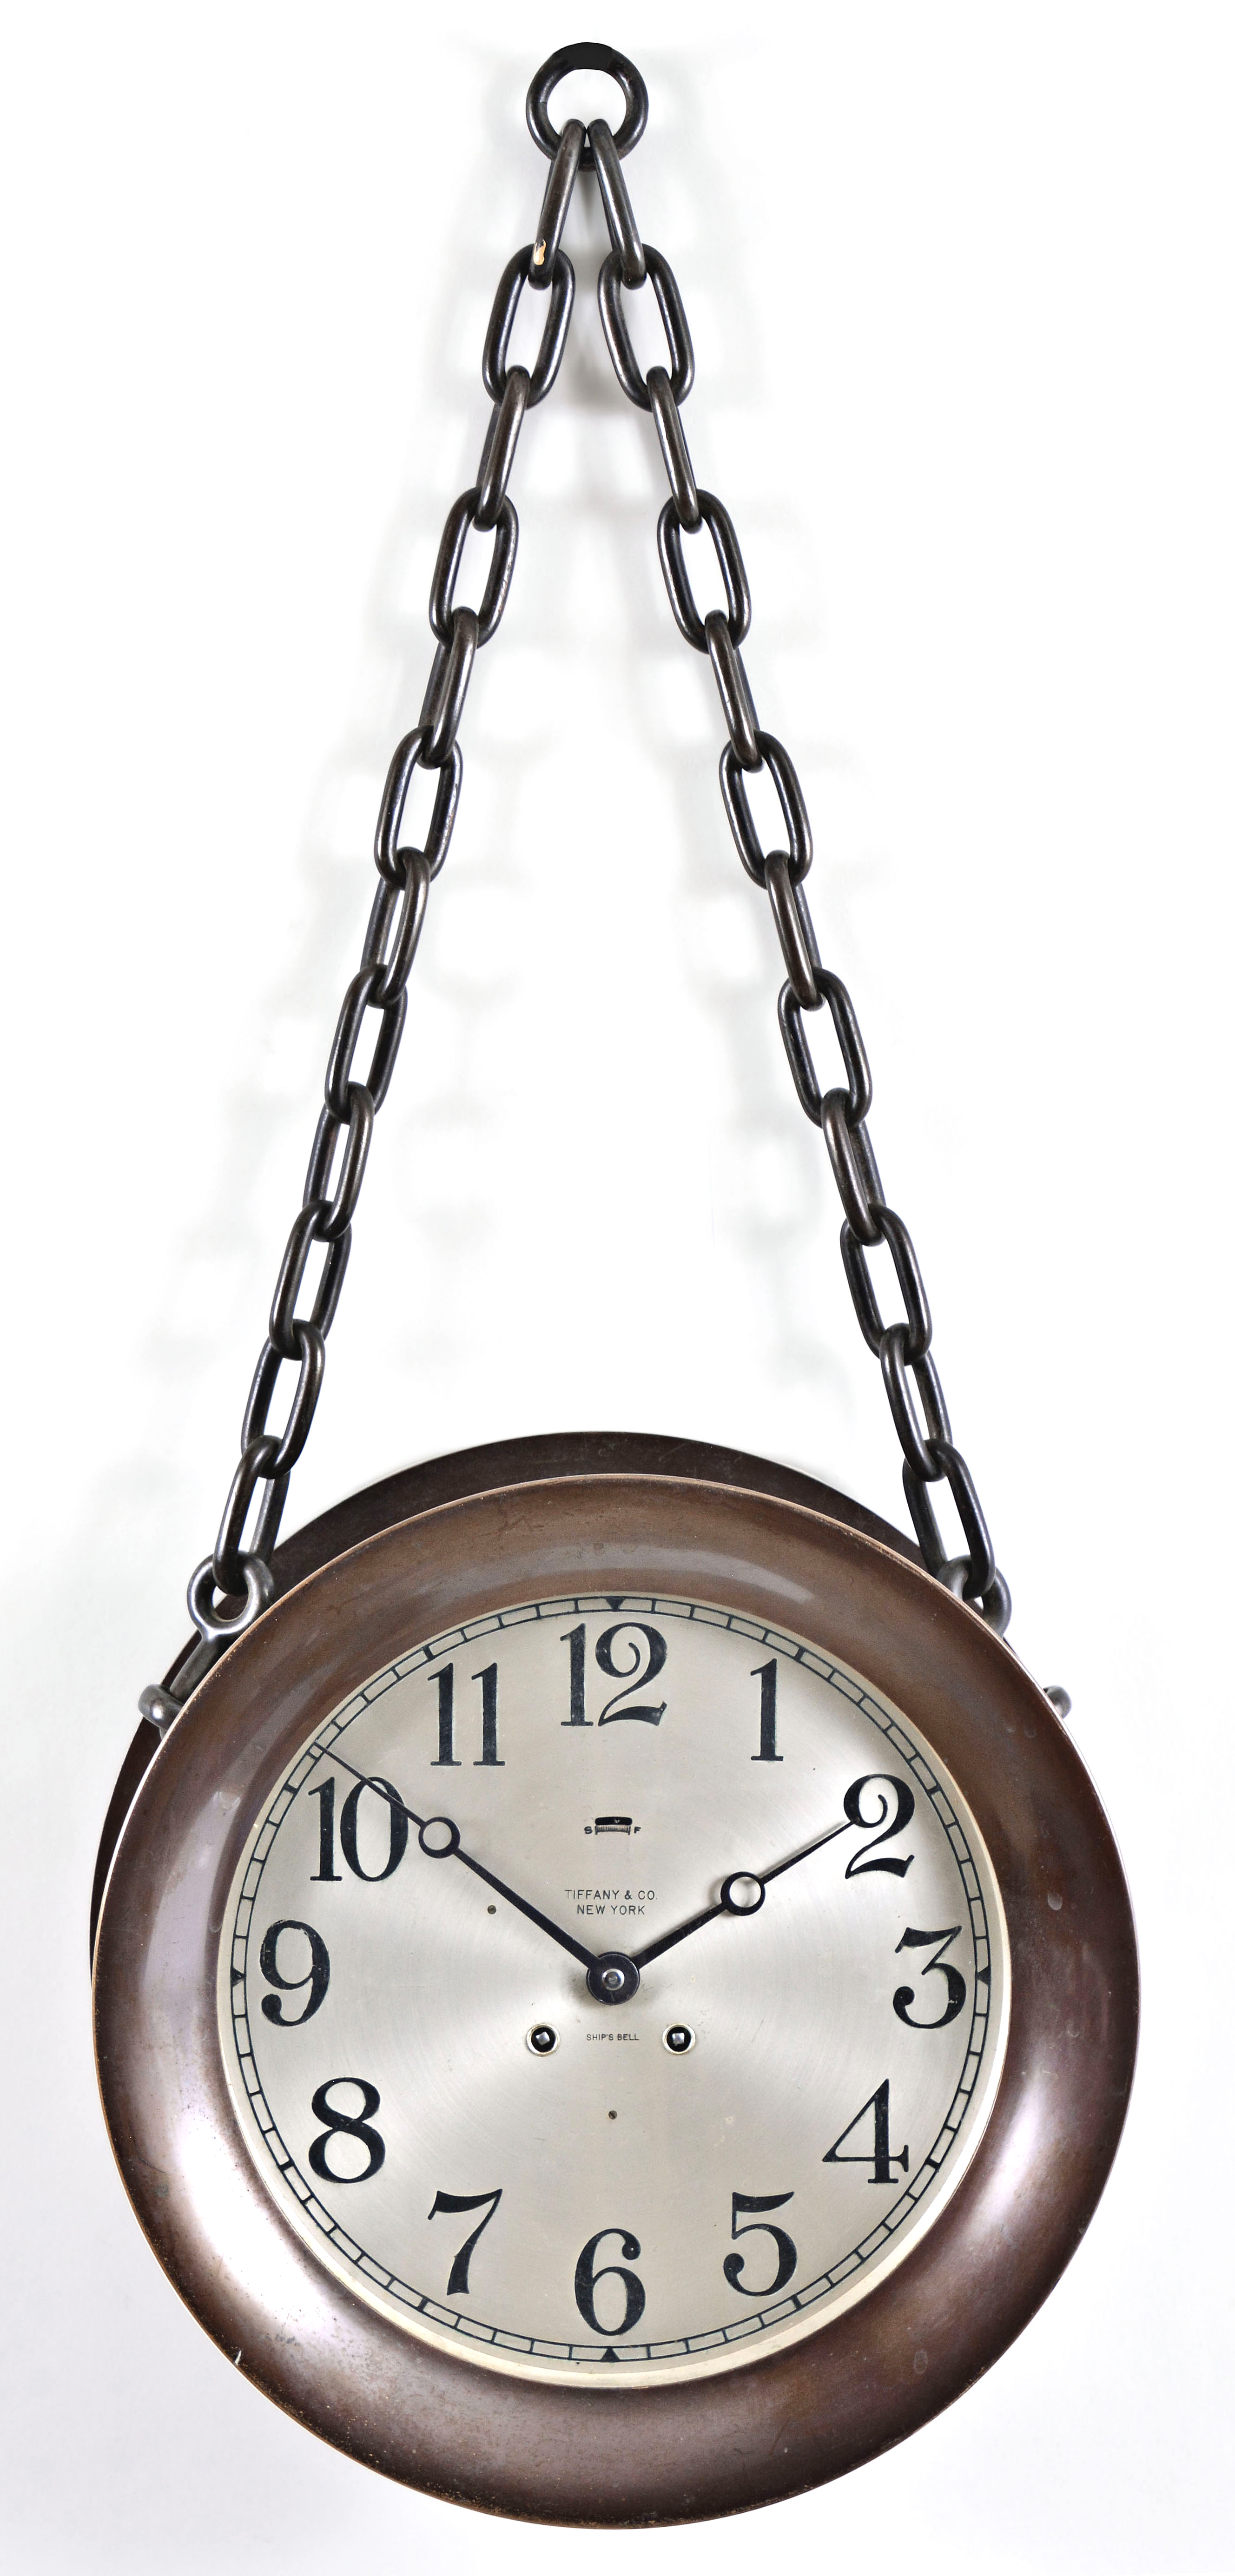 Chelsea Clock Co. 10 inch Ships Bell Chain Clock for Tiffany & Co.